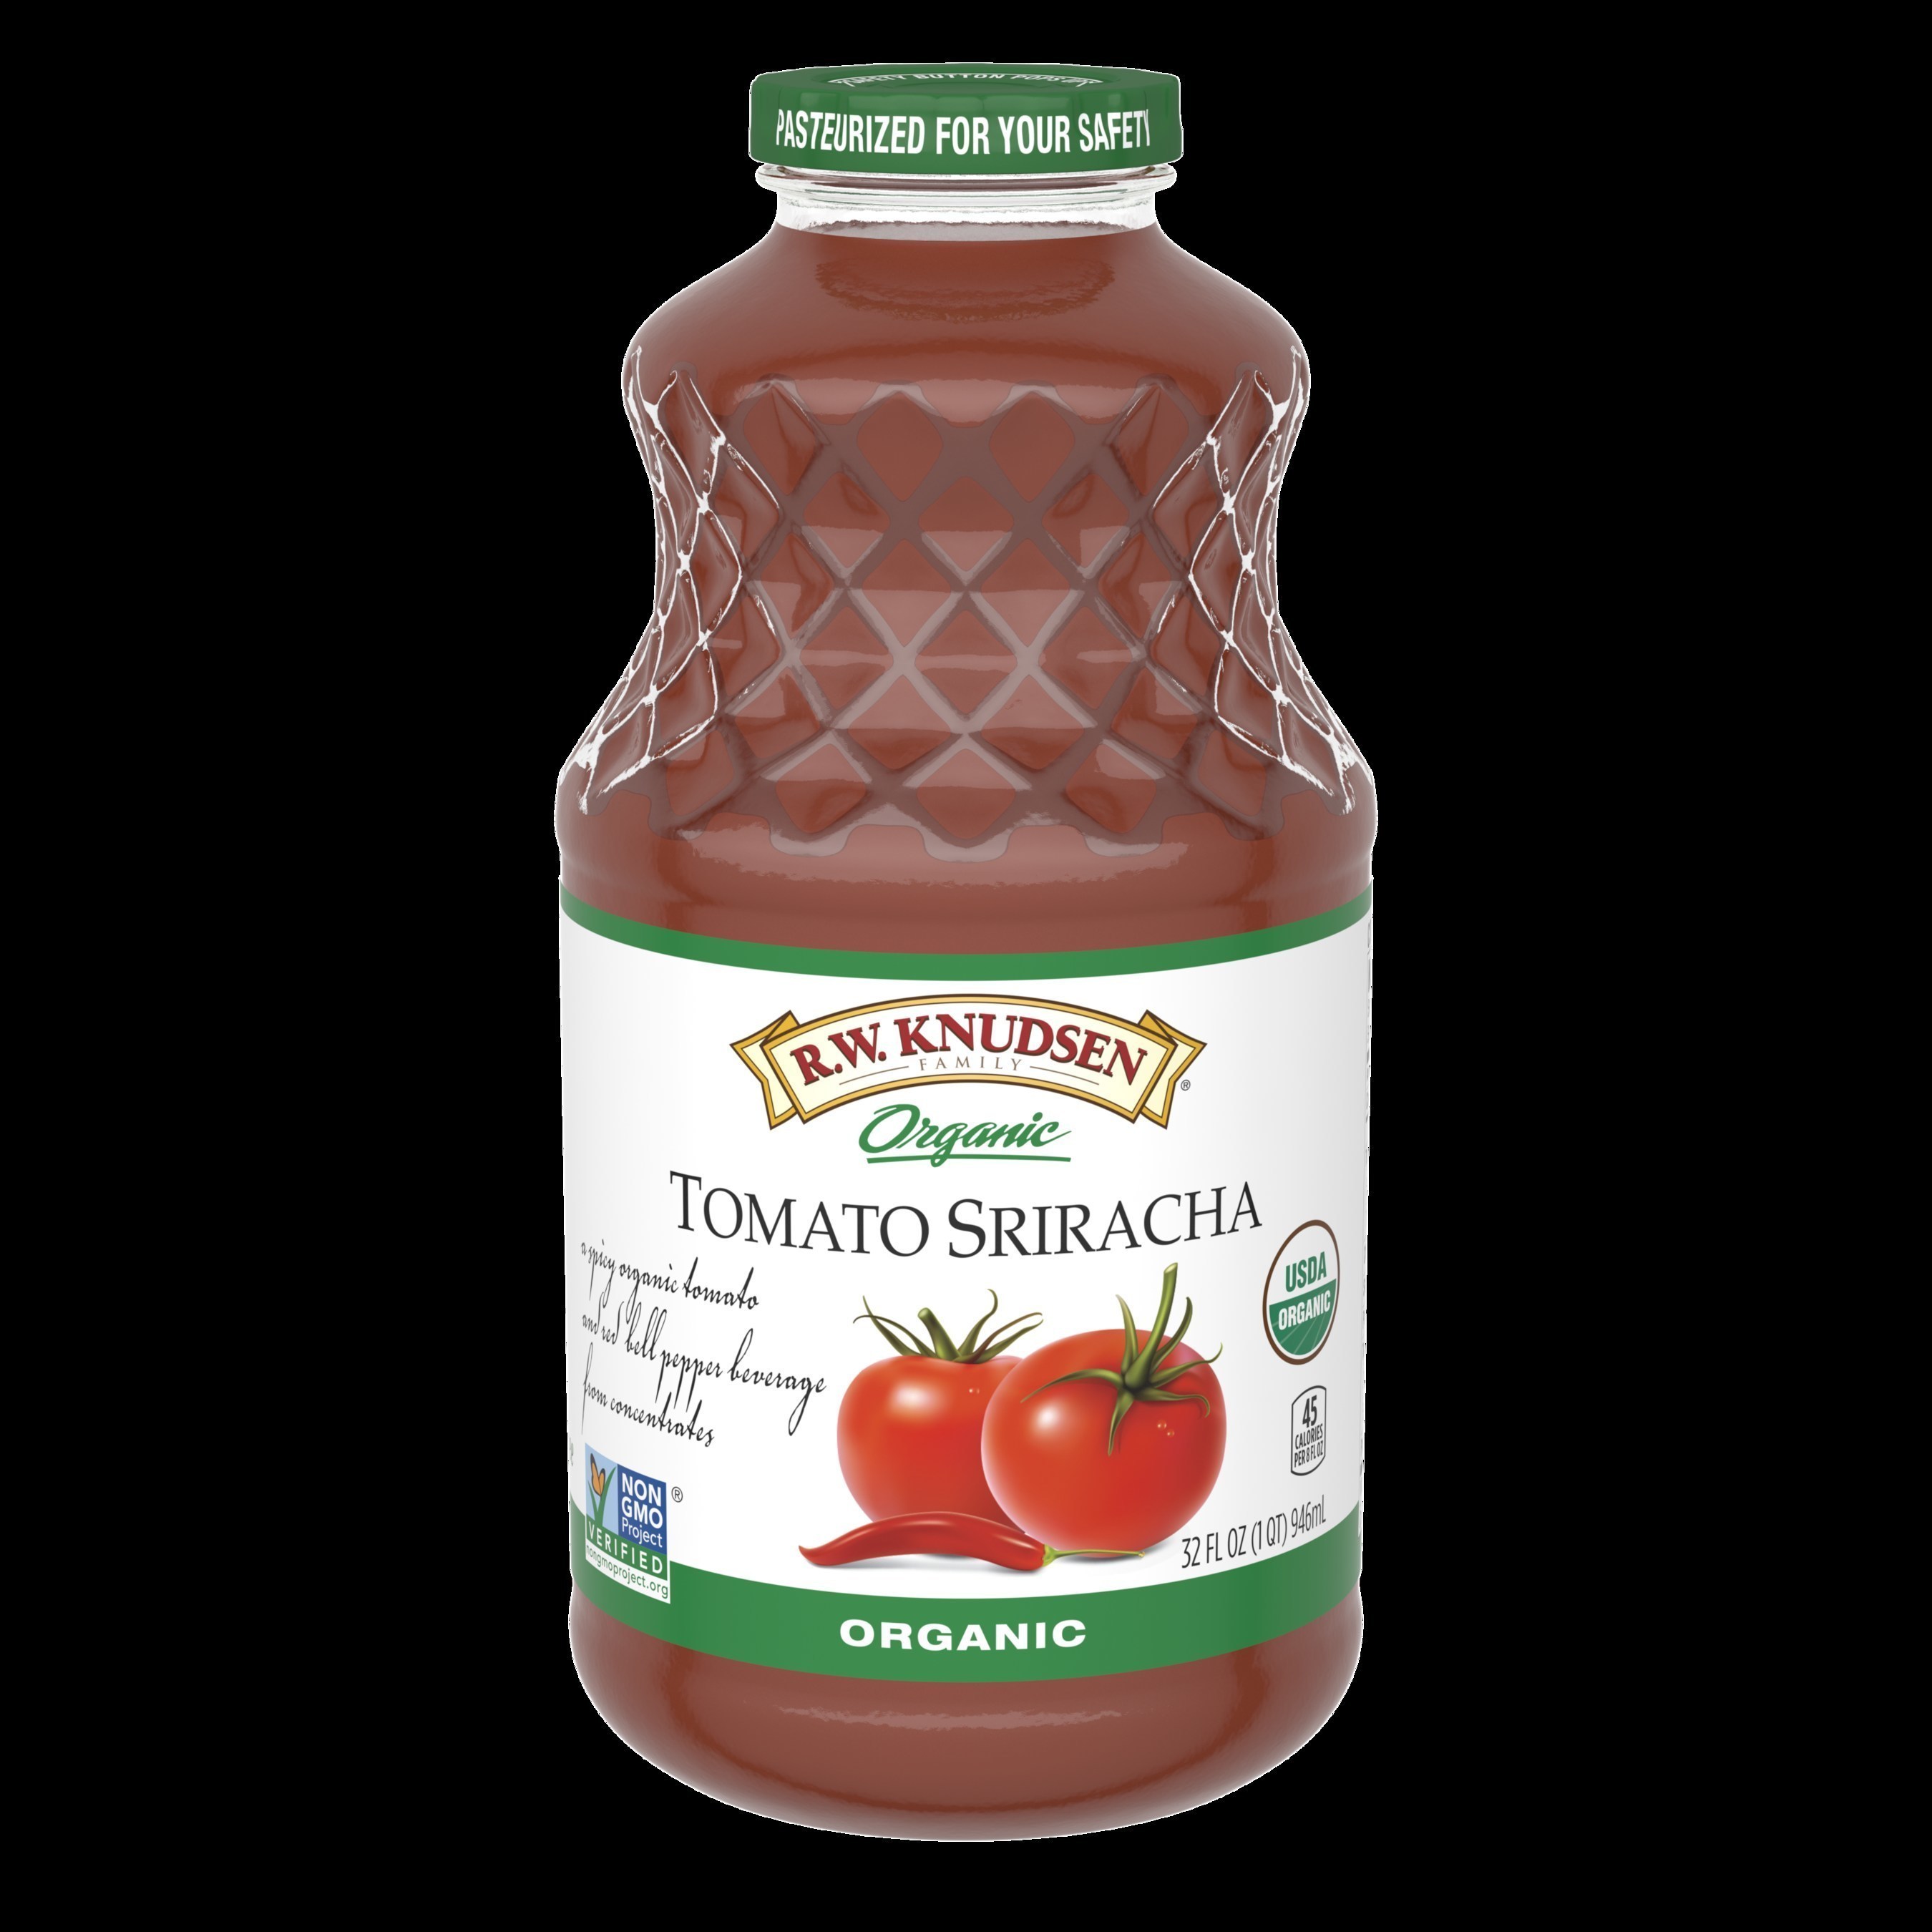 R.W. Knudsen Family(R) announces the launch of five new vegetable juice blend and beverage varieties including Organic Tomato Sriracha available at natural and conventional retailers.